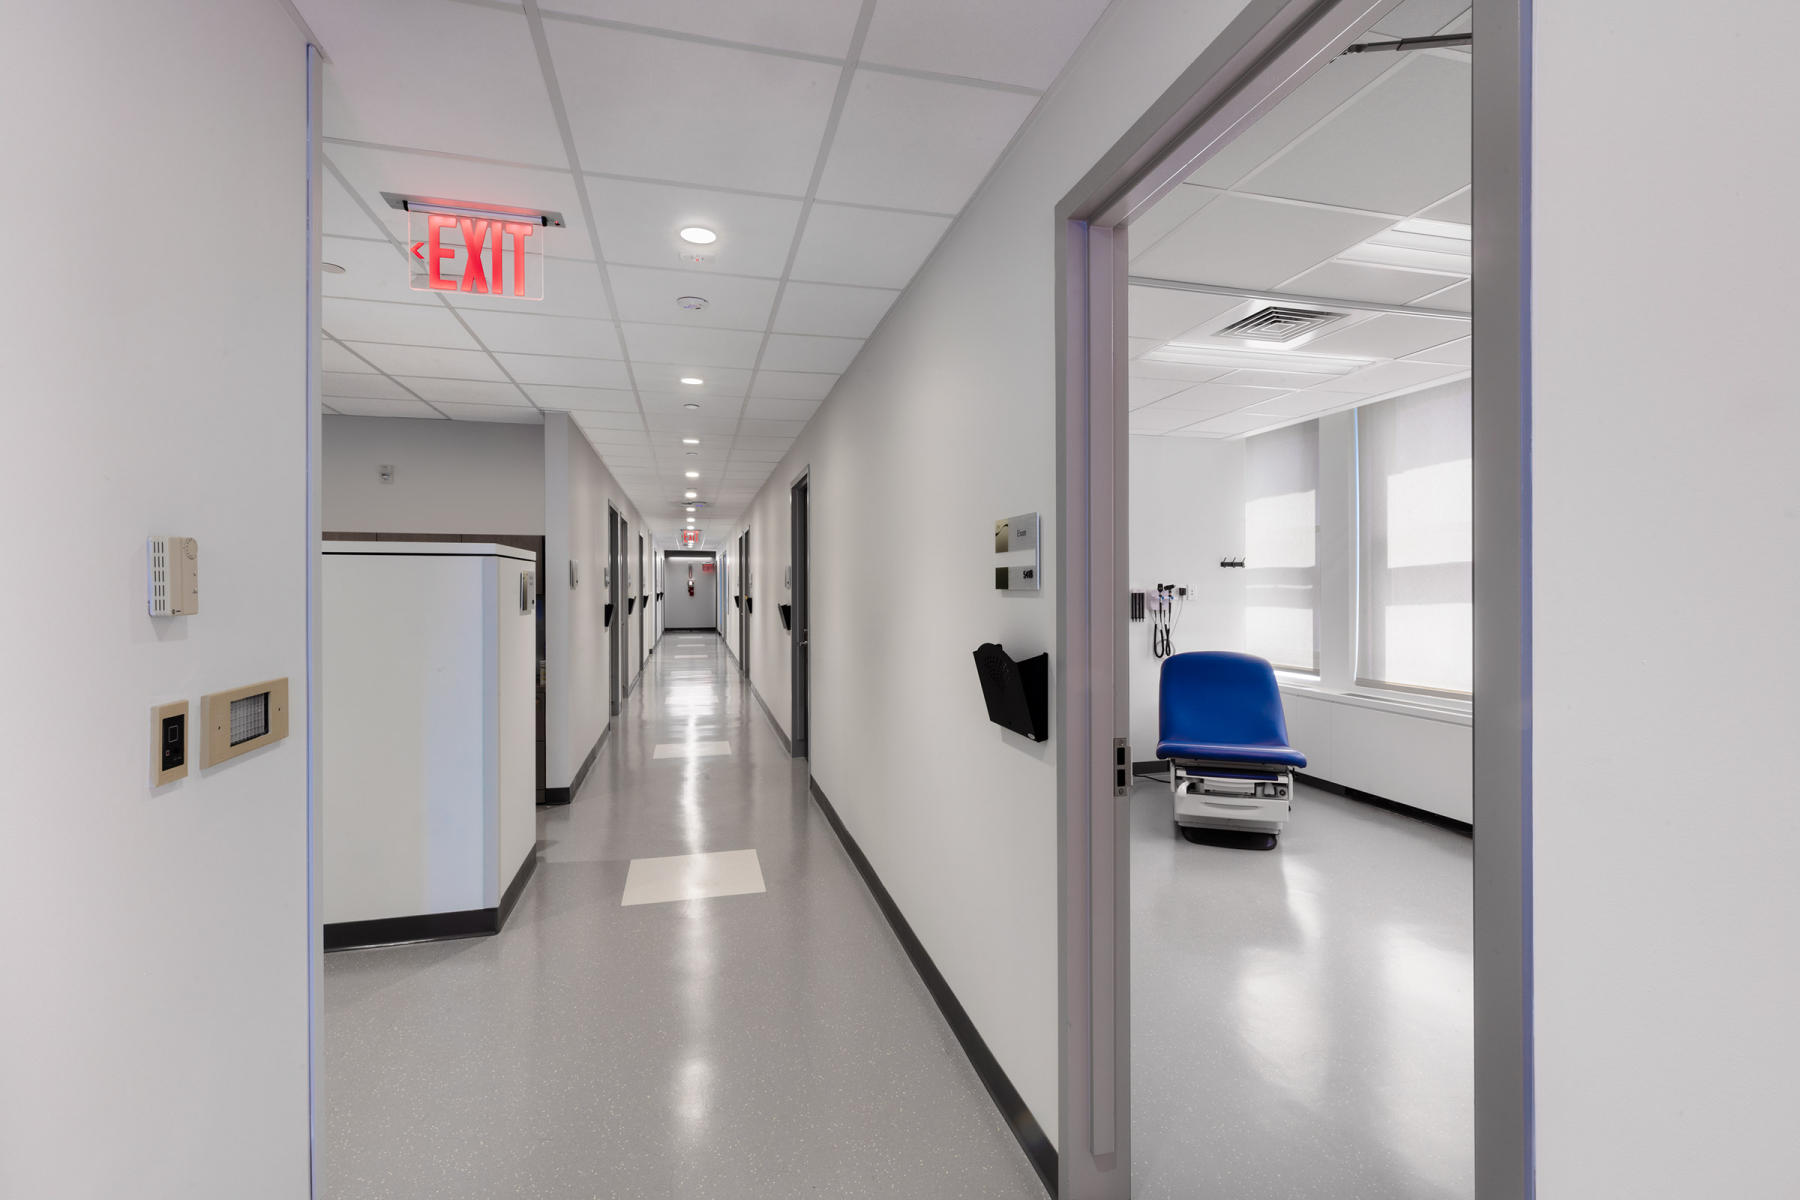 Examination room and hallway built by Dynamic Construction as the GC. : Dynamic Construction : New York NY Architectural Photographer | Interior and Exterior